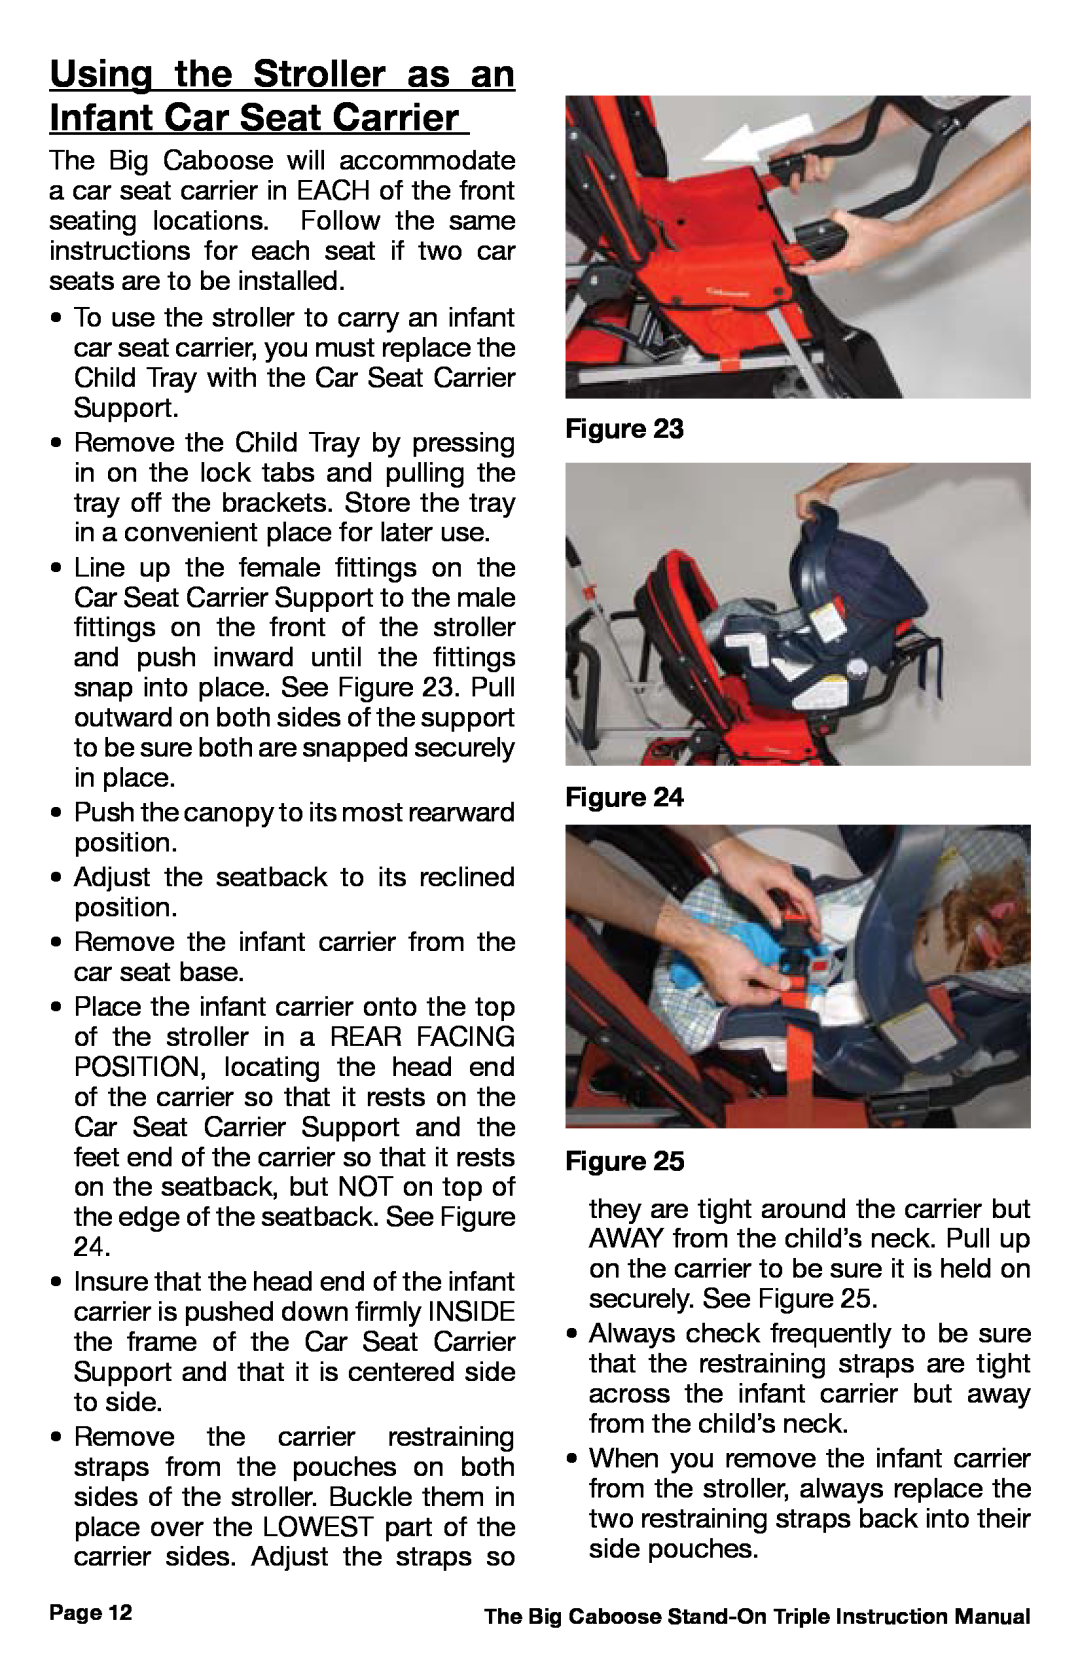 Chicco 431, 430, 437 manual Using the Stroller as an Infant Car Seat Carrier 